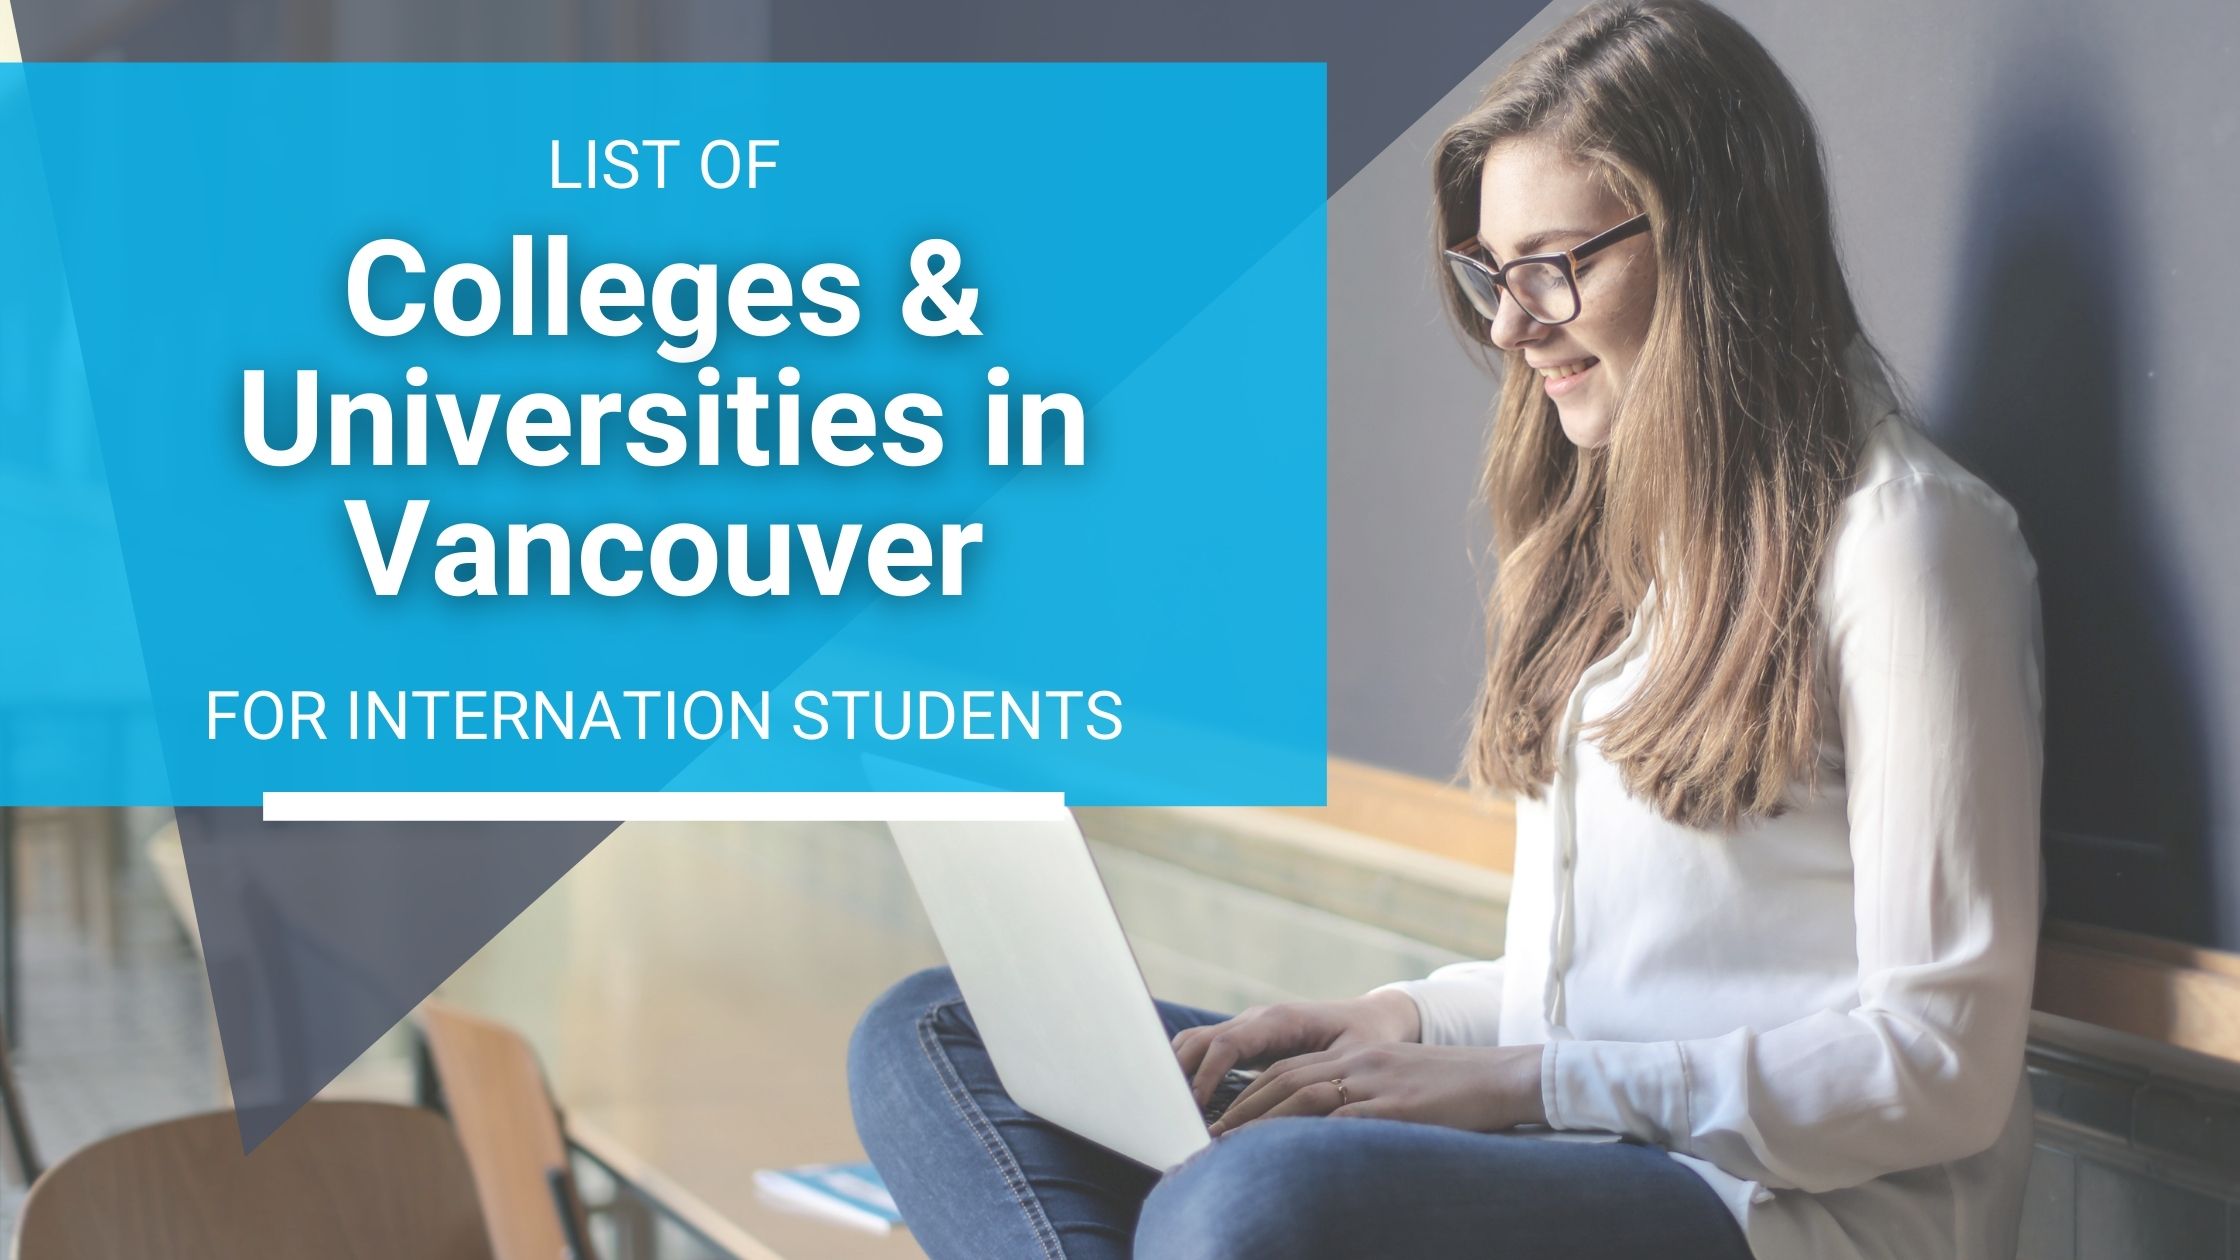 List of colleges & universities in Vancouver for International Student 2021